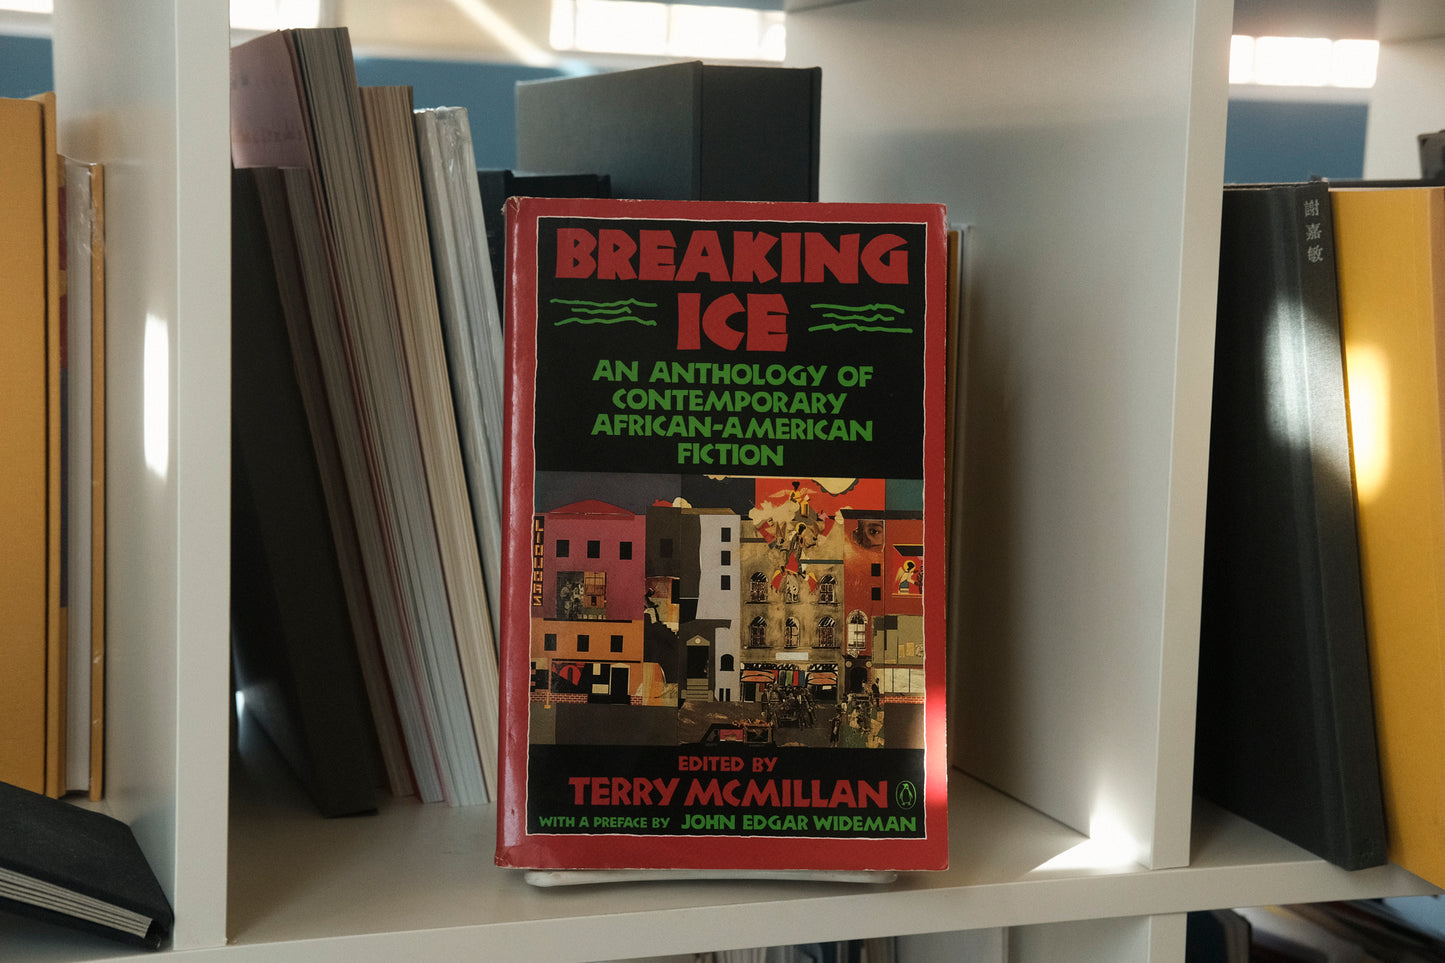 Breaking Ice: An Anthology of Contemporary African American Fiction edited by Terry McMillan